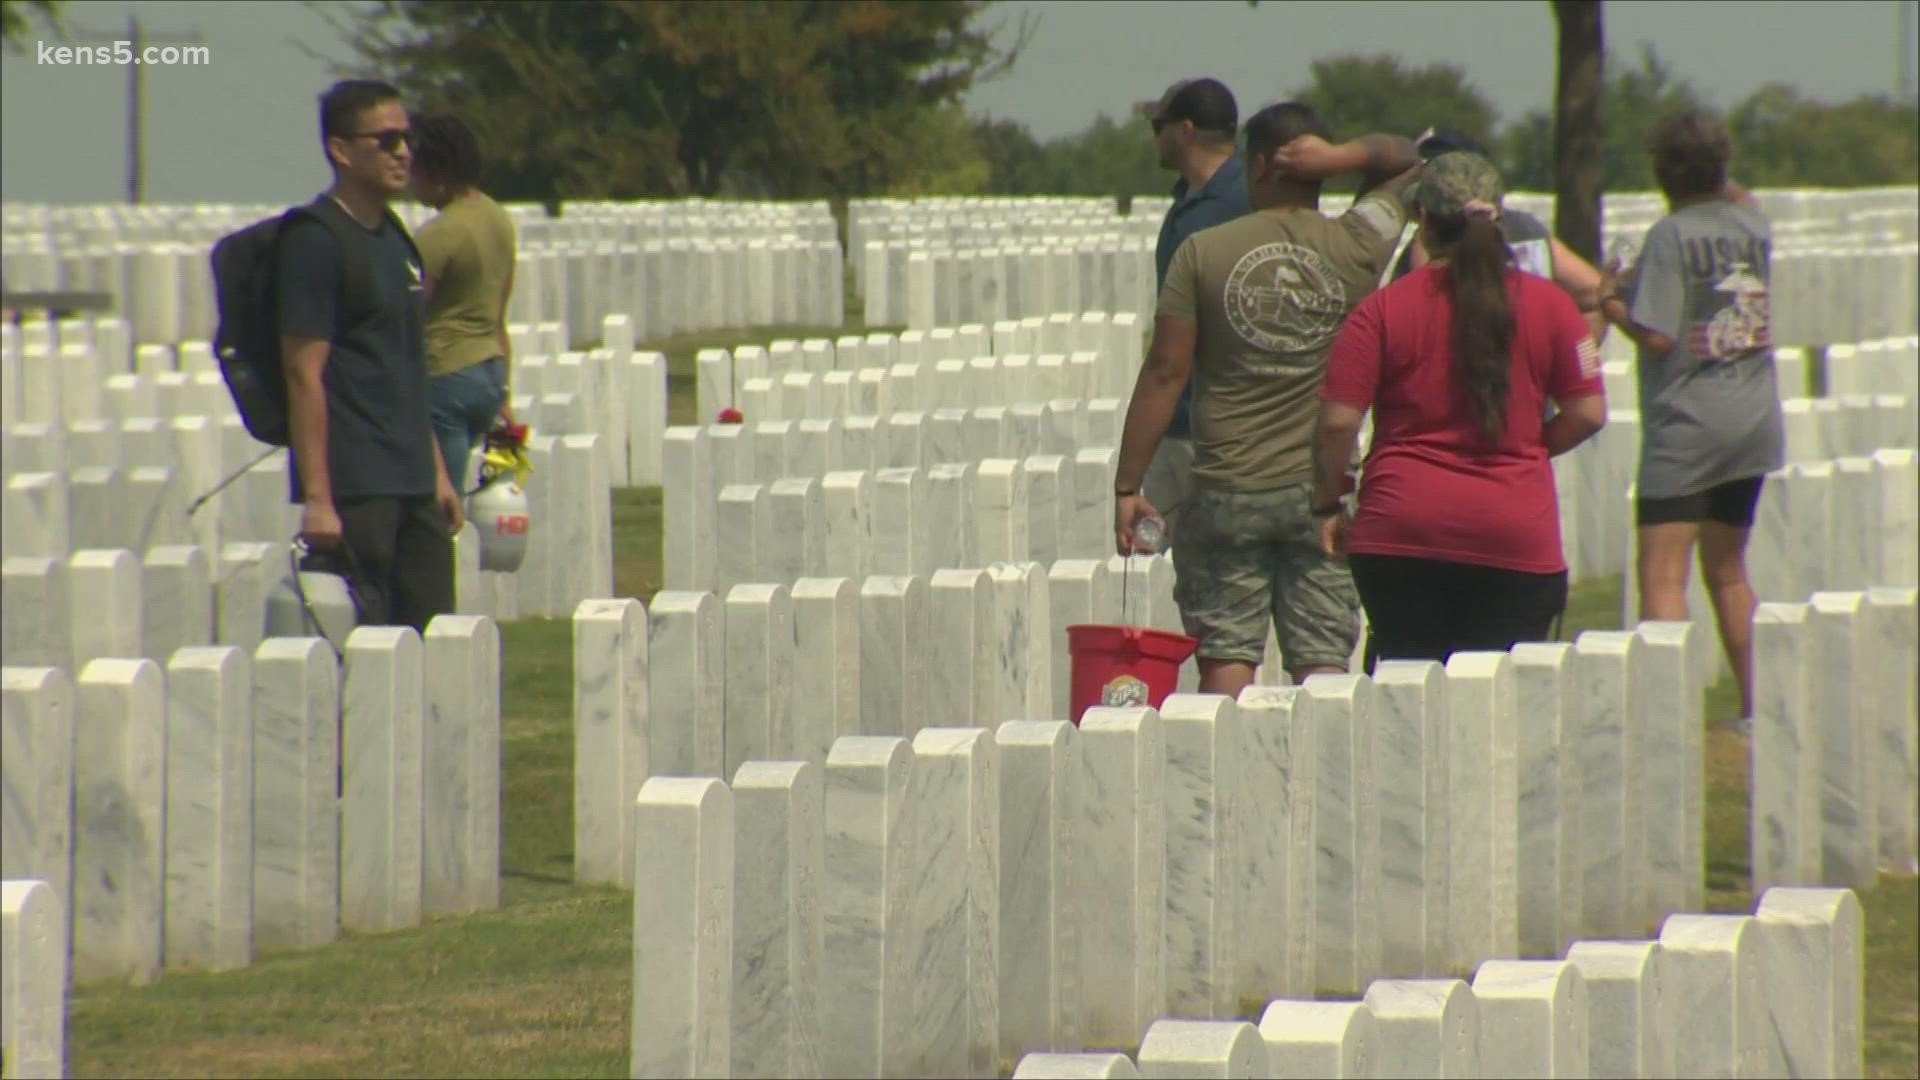 "It's something that I hope somebody will do for me someday," said one veteran who worked with Carry the Load at Fort Sam Houston National Cemetery.